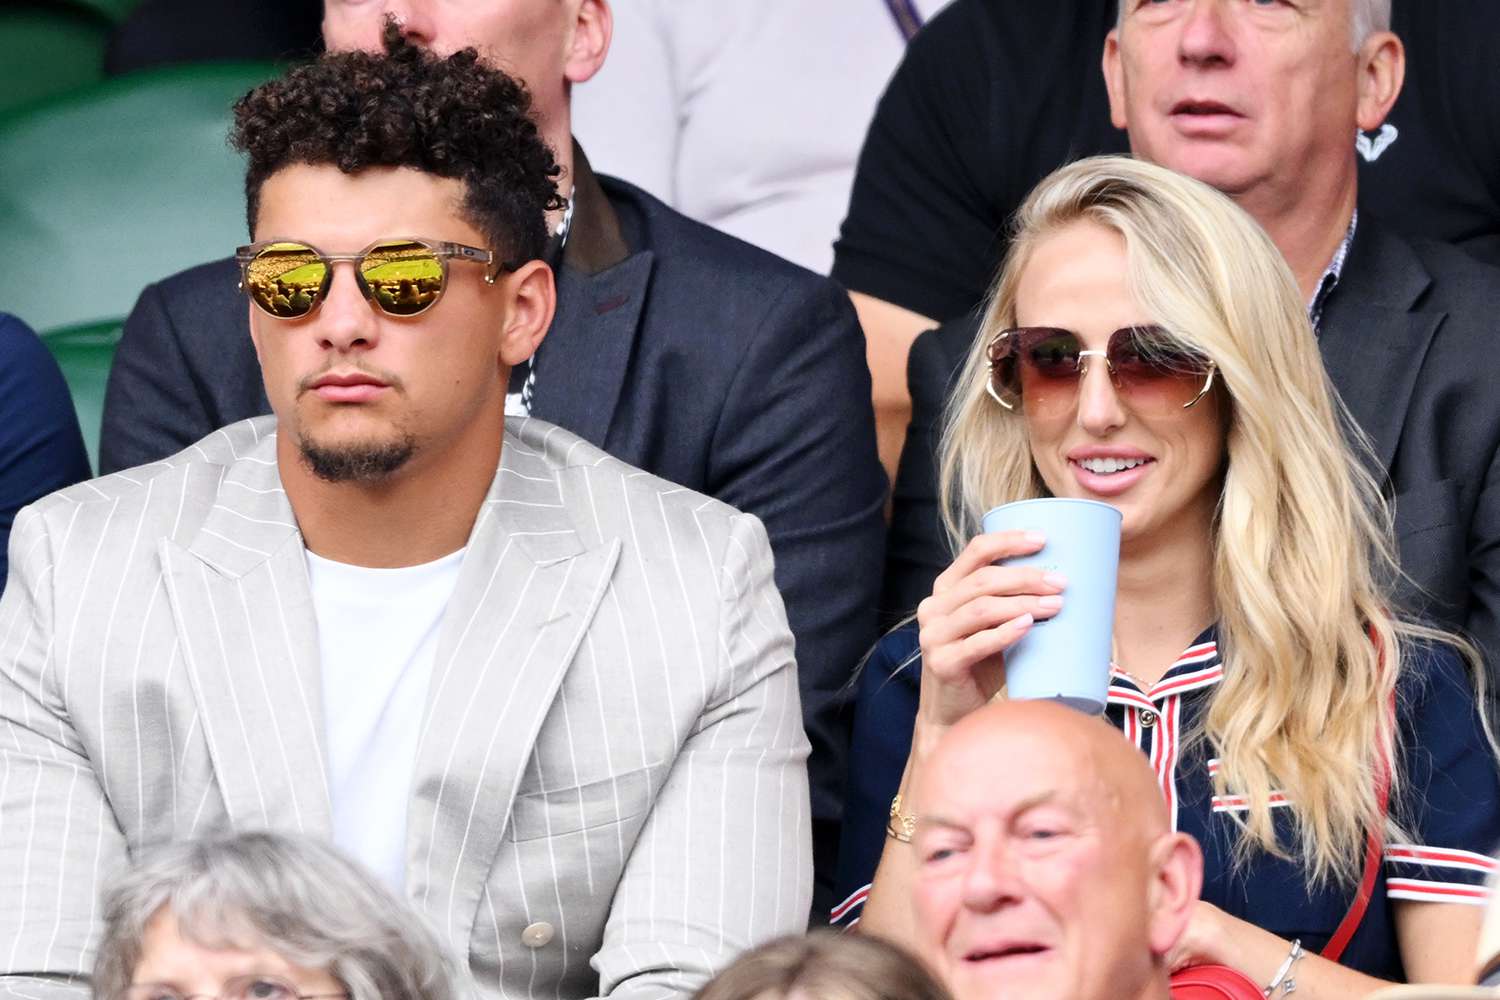 Brittany Mahomes Wears $6,000+ Gucci Outfit for Wimbledon Date with Husband Patrick